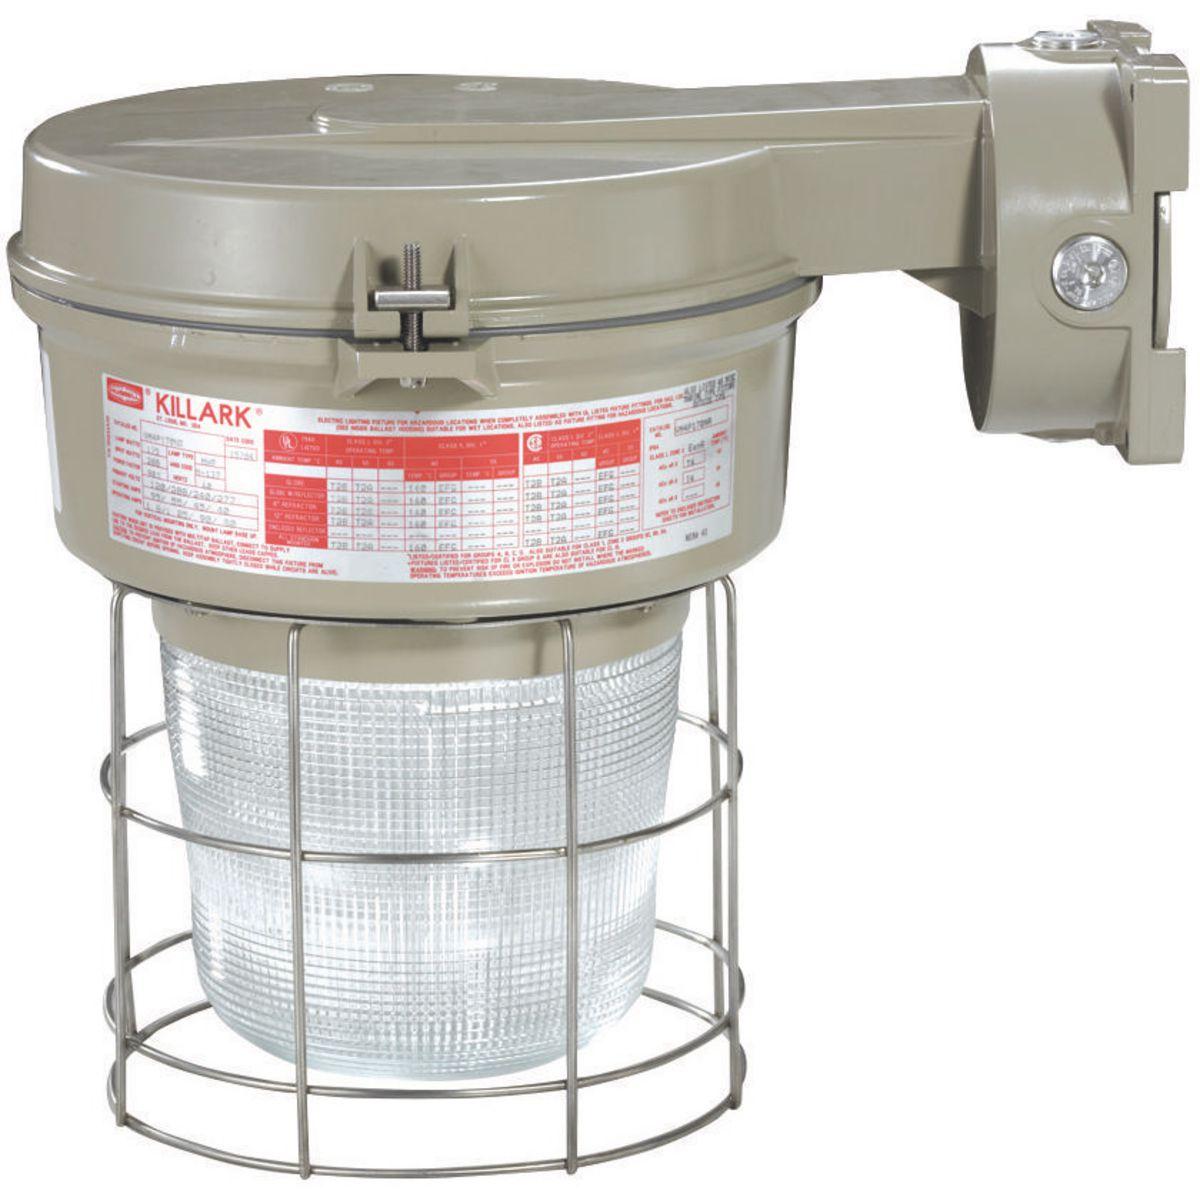 Hubbell VM4P175B2R1G VM4 Series - 175W Metal Halide 480V - 3/4" Wall Mount - Type I Glass Refractor and Guard  ; Ballast tank and splice box – corrosion resistant copper-free aluminum alloy with baked powder epoxy/polyester finish, electrostatically applied for complete, unif